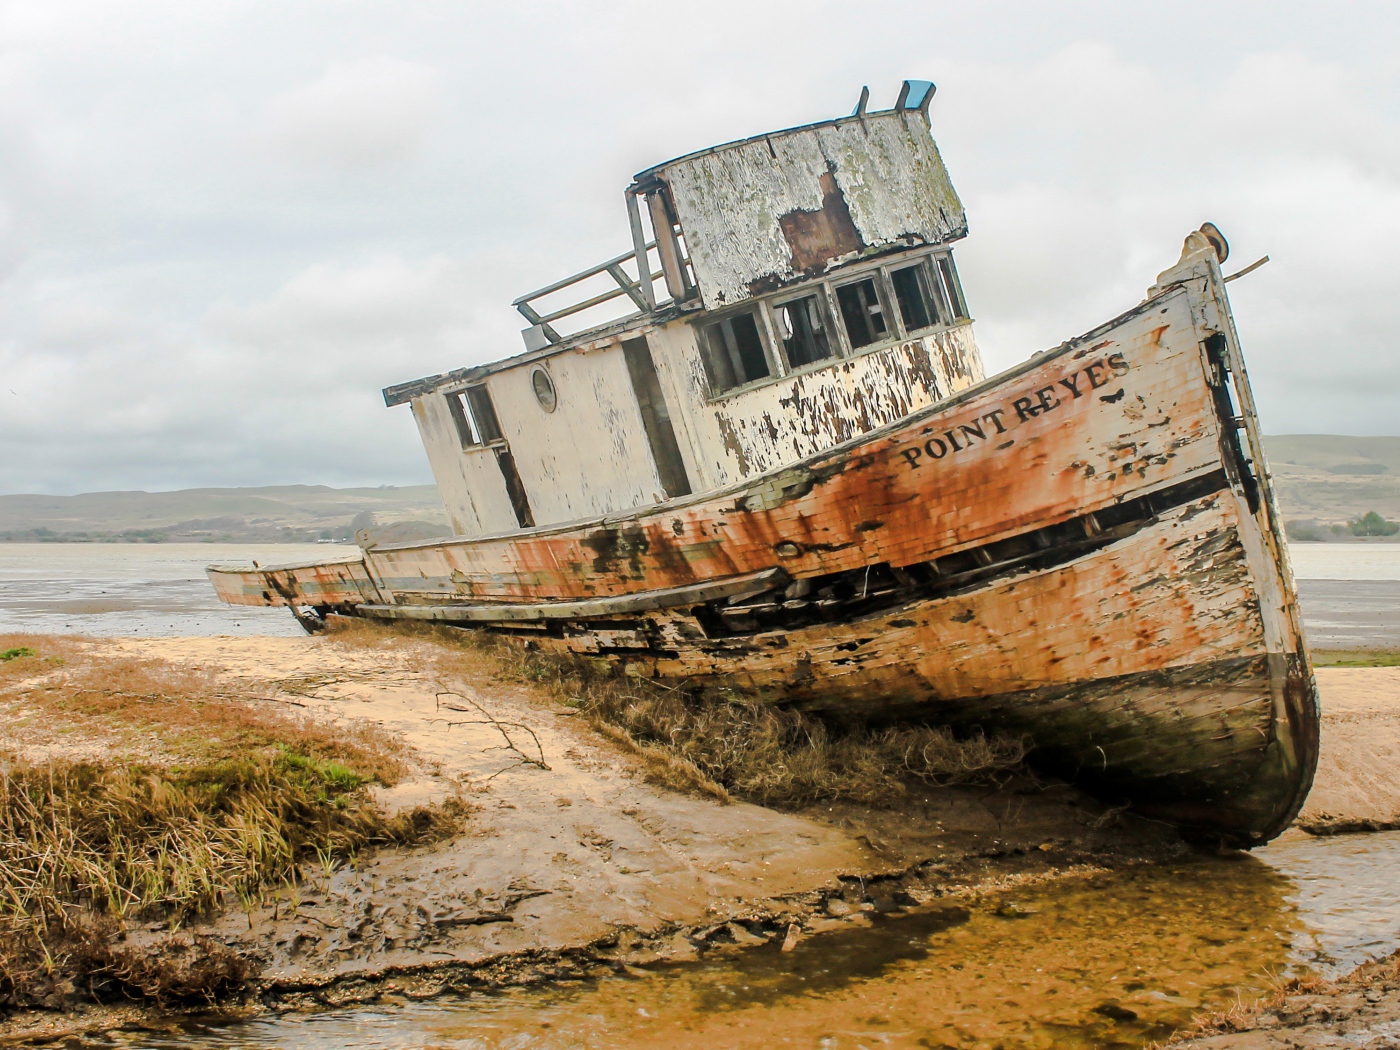 Old abandoned fishing boat on the shore